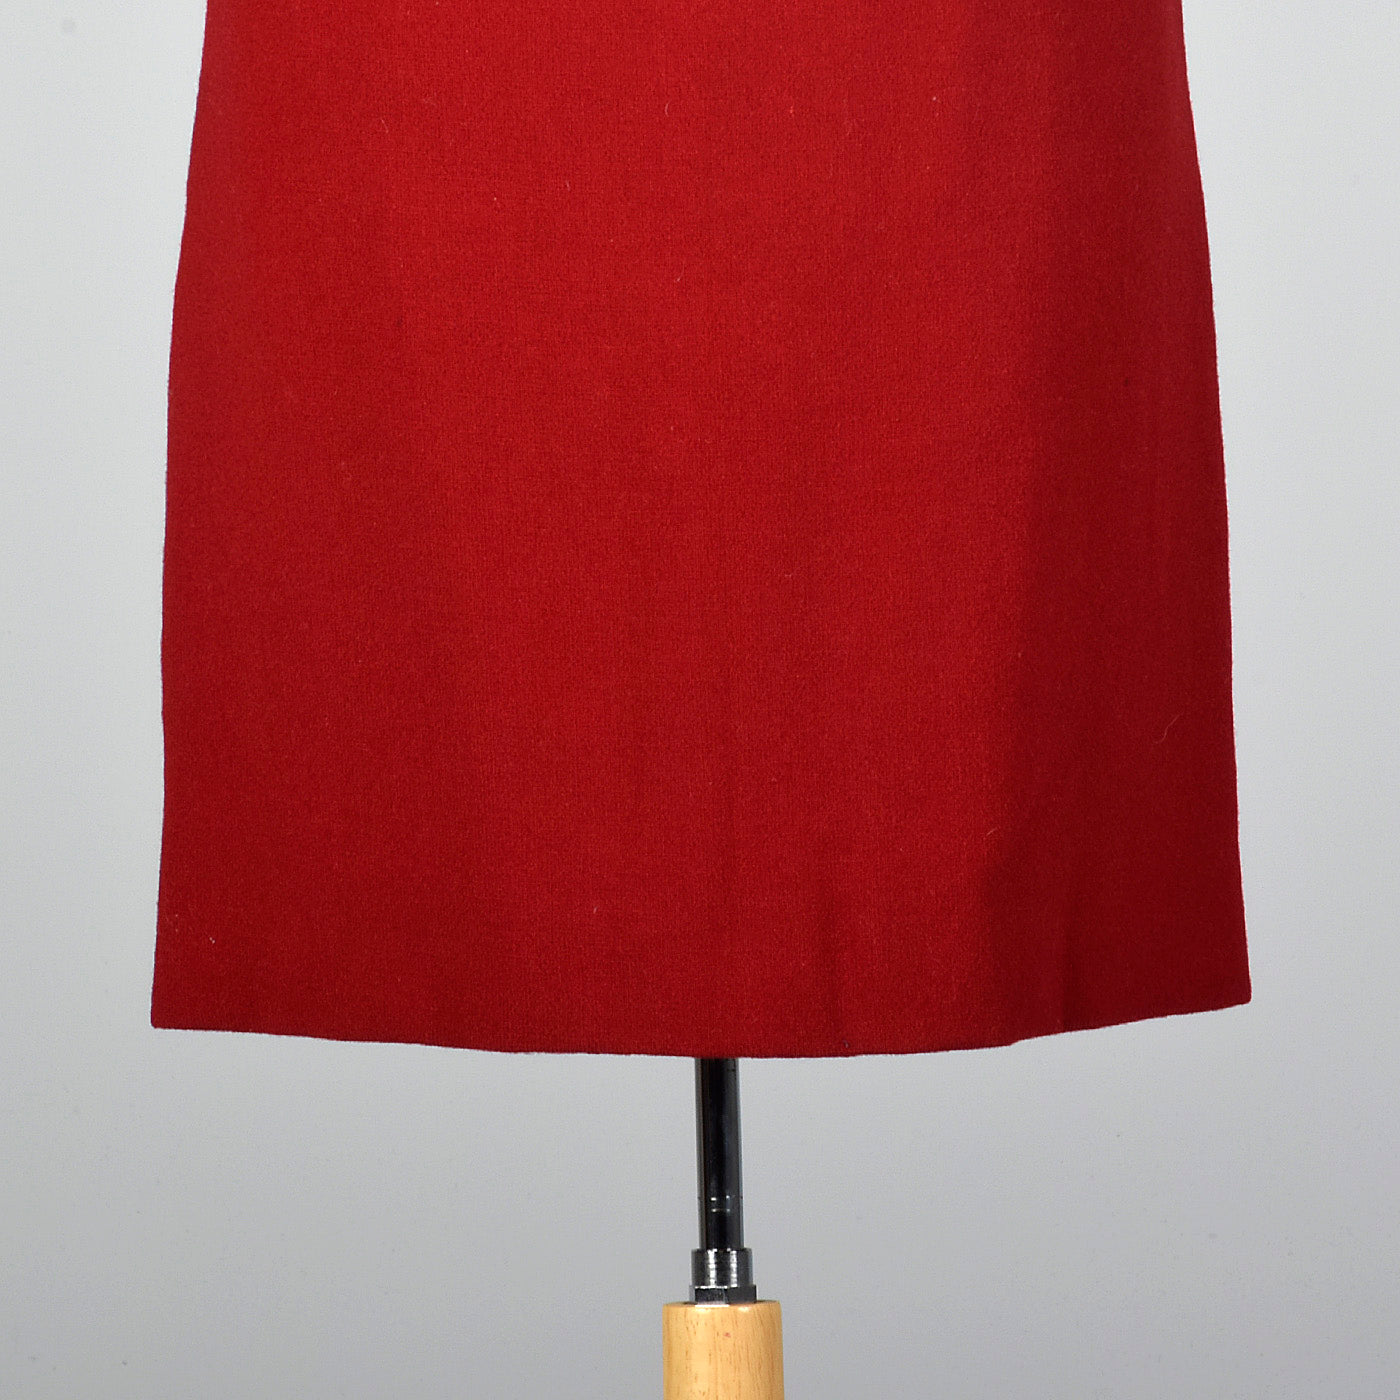 1950s Red Wool Dress with Satin Collar